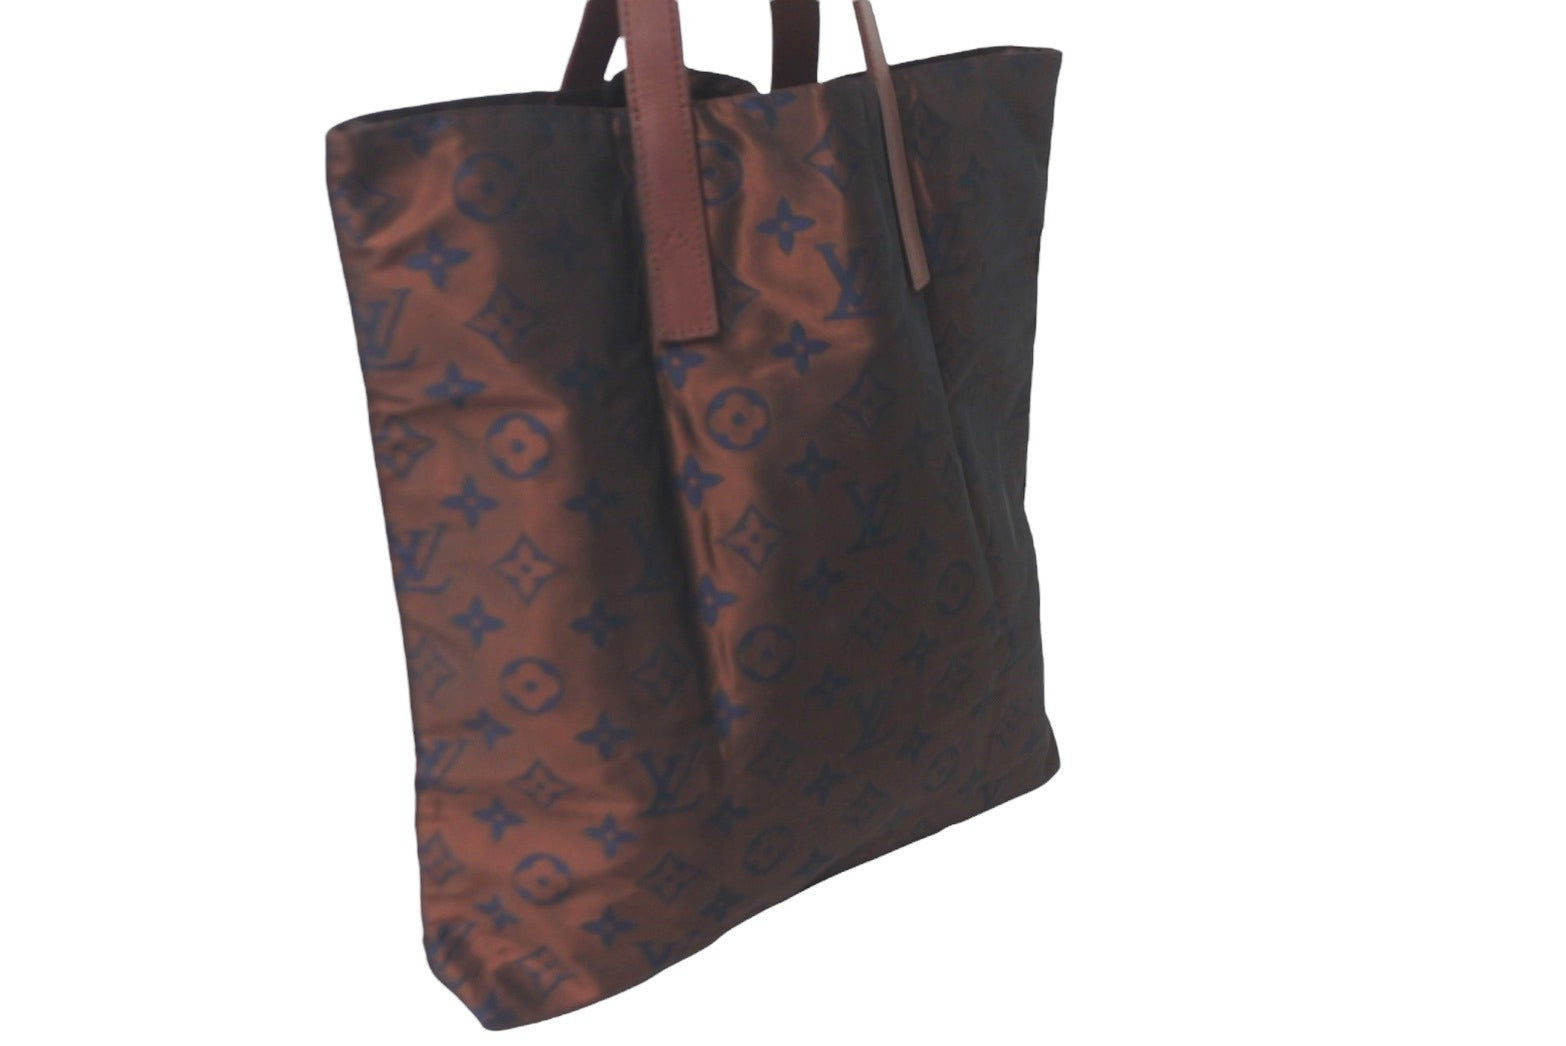 LOUIS VUITTON ルイヴィトン トートバッグ カバ エスカパード 